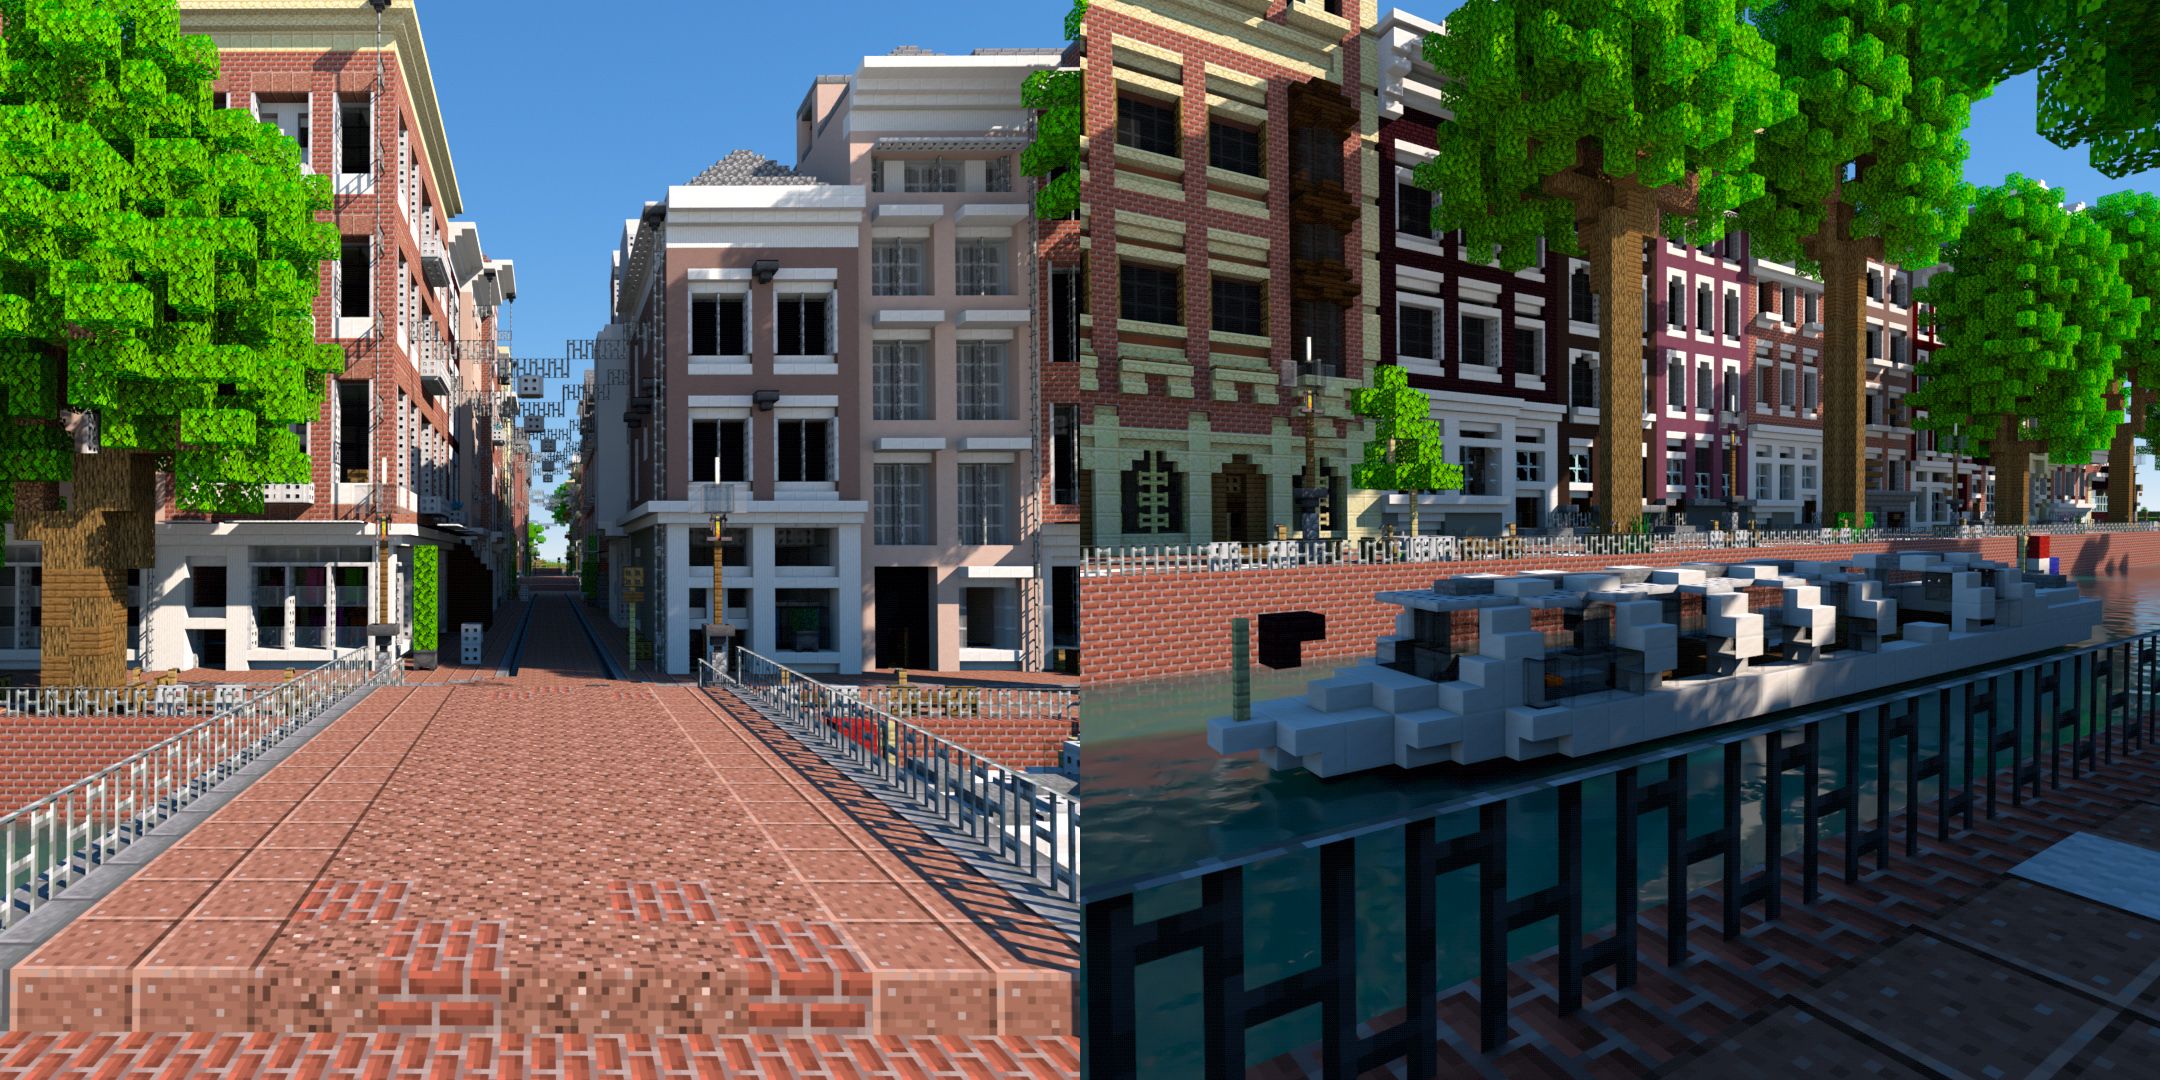 Minecraft Recreation Of Amsterdam Streets And Canals